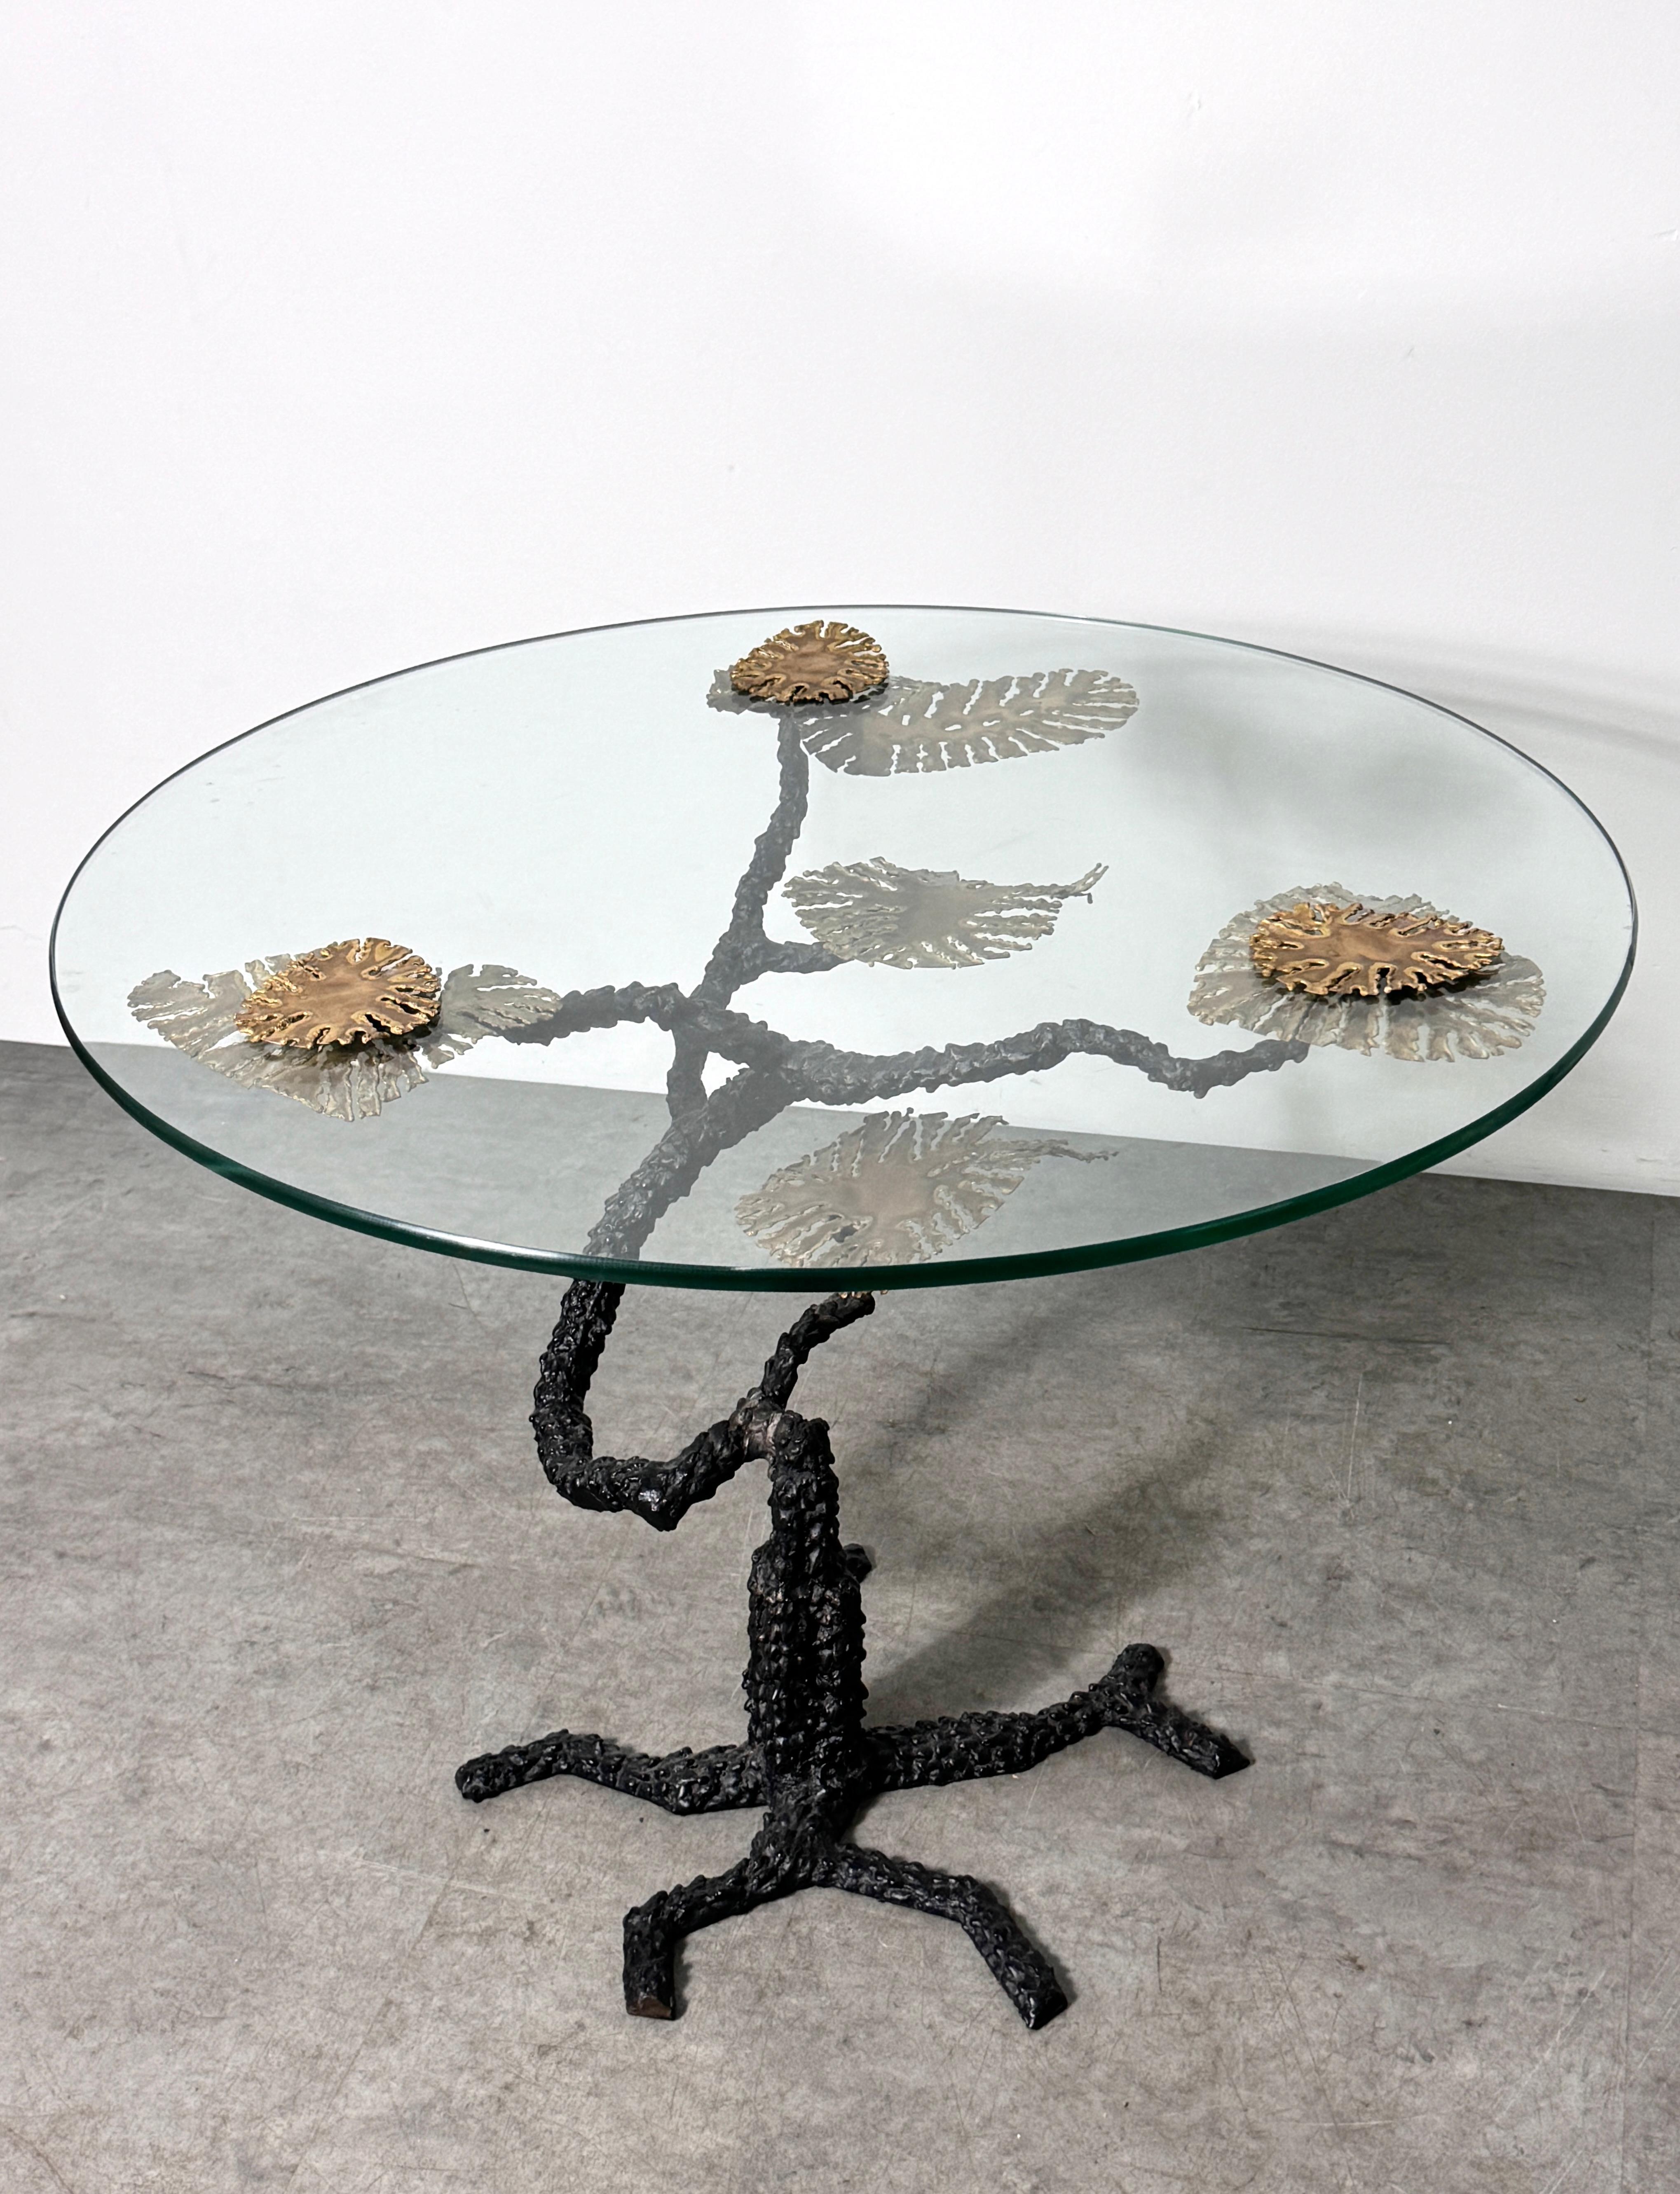 Unique sculptural bronze and glass side table in the style of Silas Seandel

Bronze bonsai tree style base with brass leaf accents and a round glass top secured with brass leaf finials

30